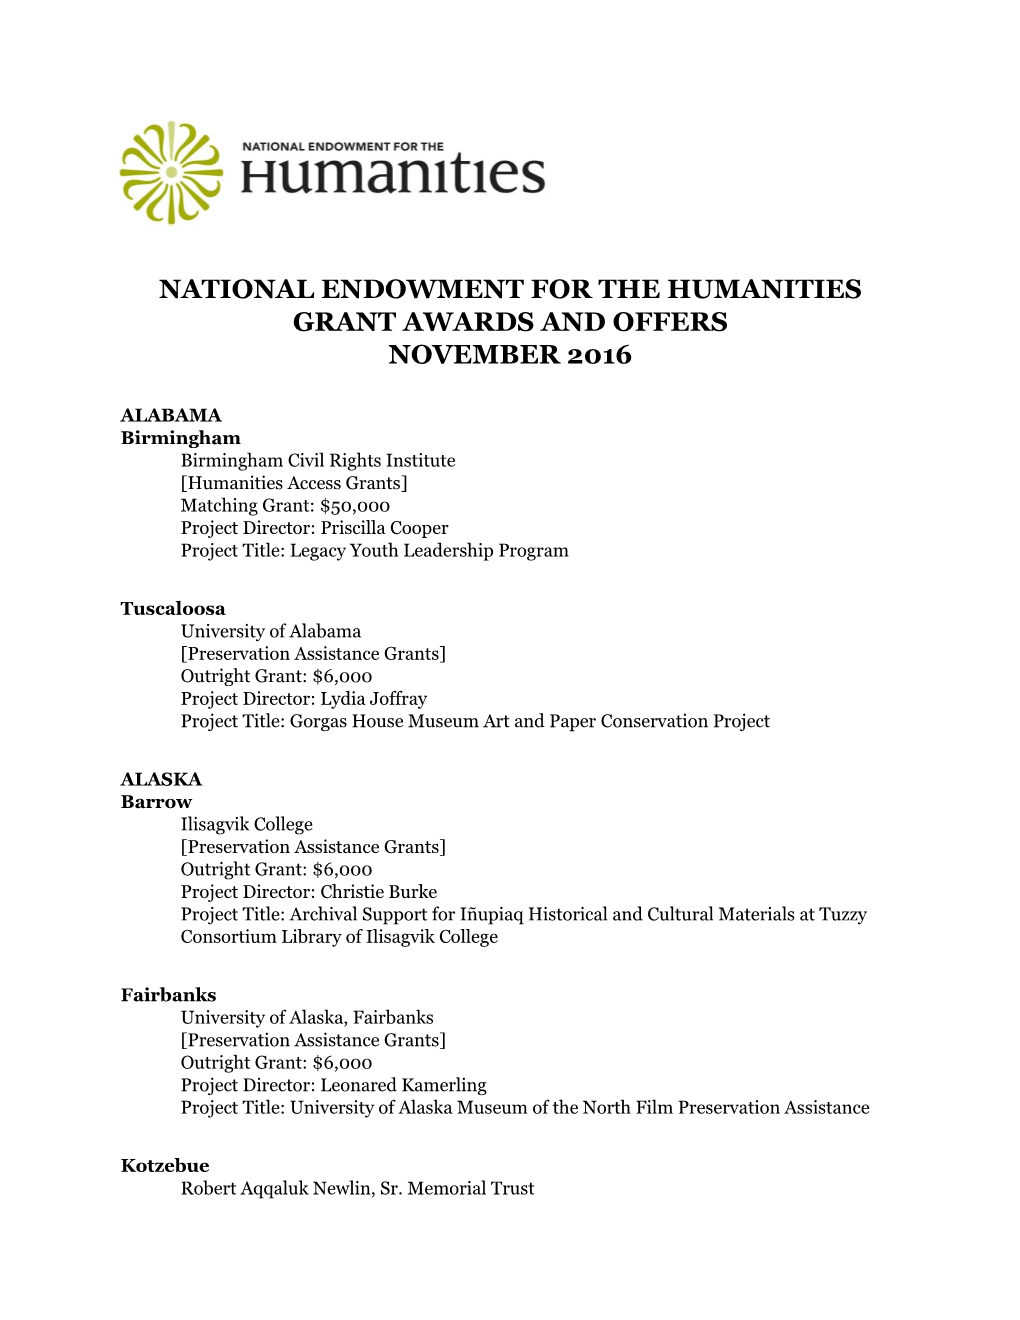 National Endowment for the Humanities Grant Awards and Offers November 2016